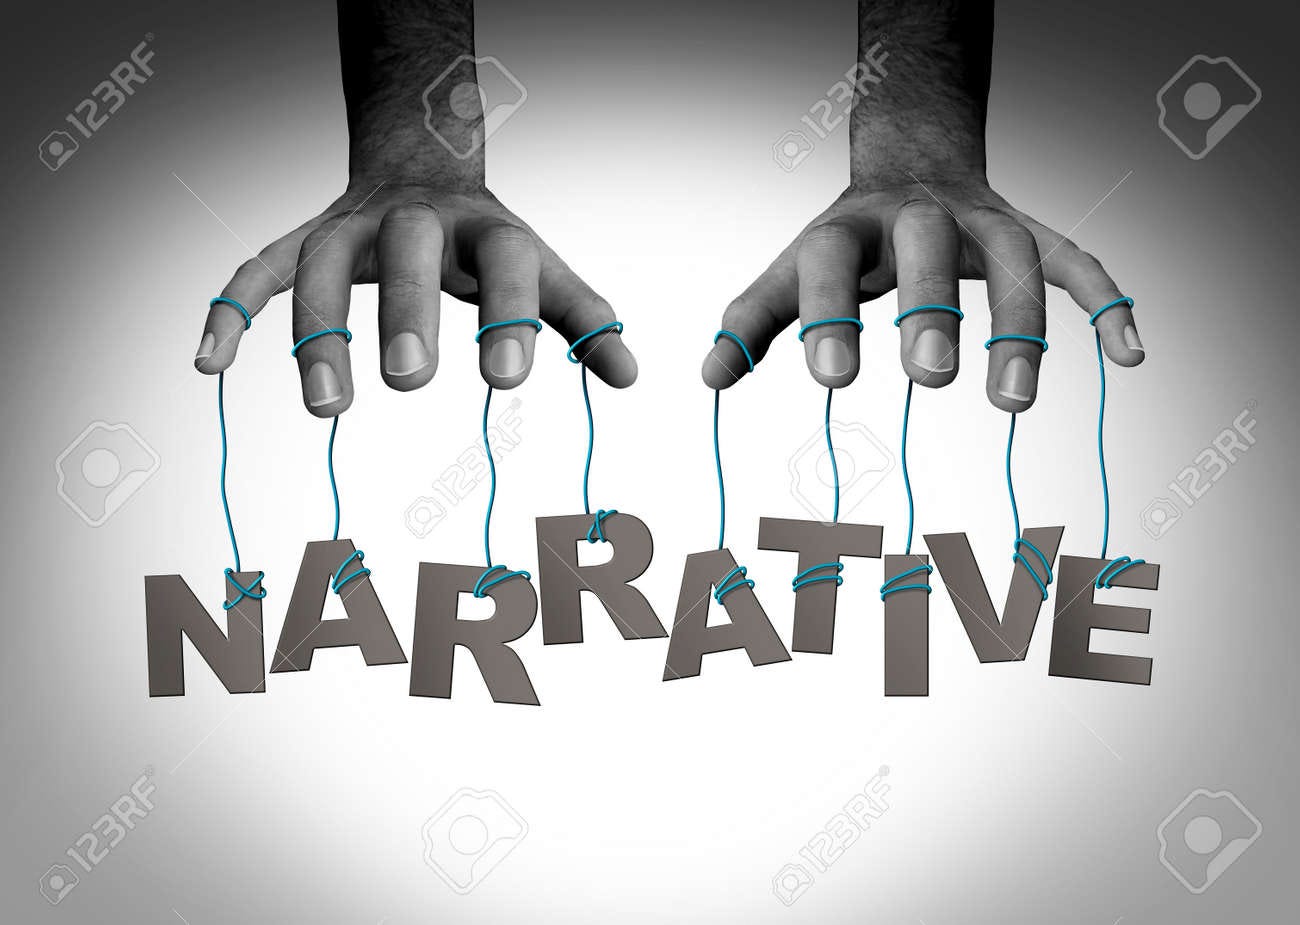 Controlling The Narrative Media Manipulation Or Directing The Conversation  As Censorship Or Political Persuasion To Control The Story As A Symbol Of A  Powerful Puppet Master In A 3D Illustration Style. Stock